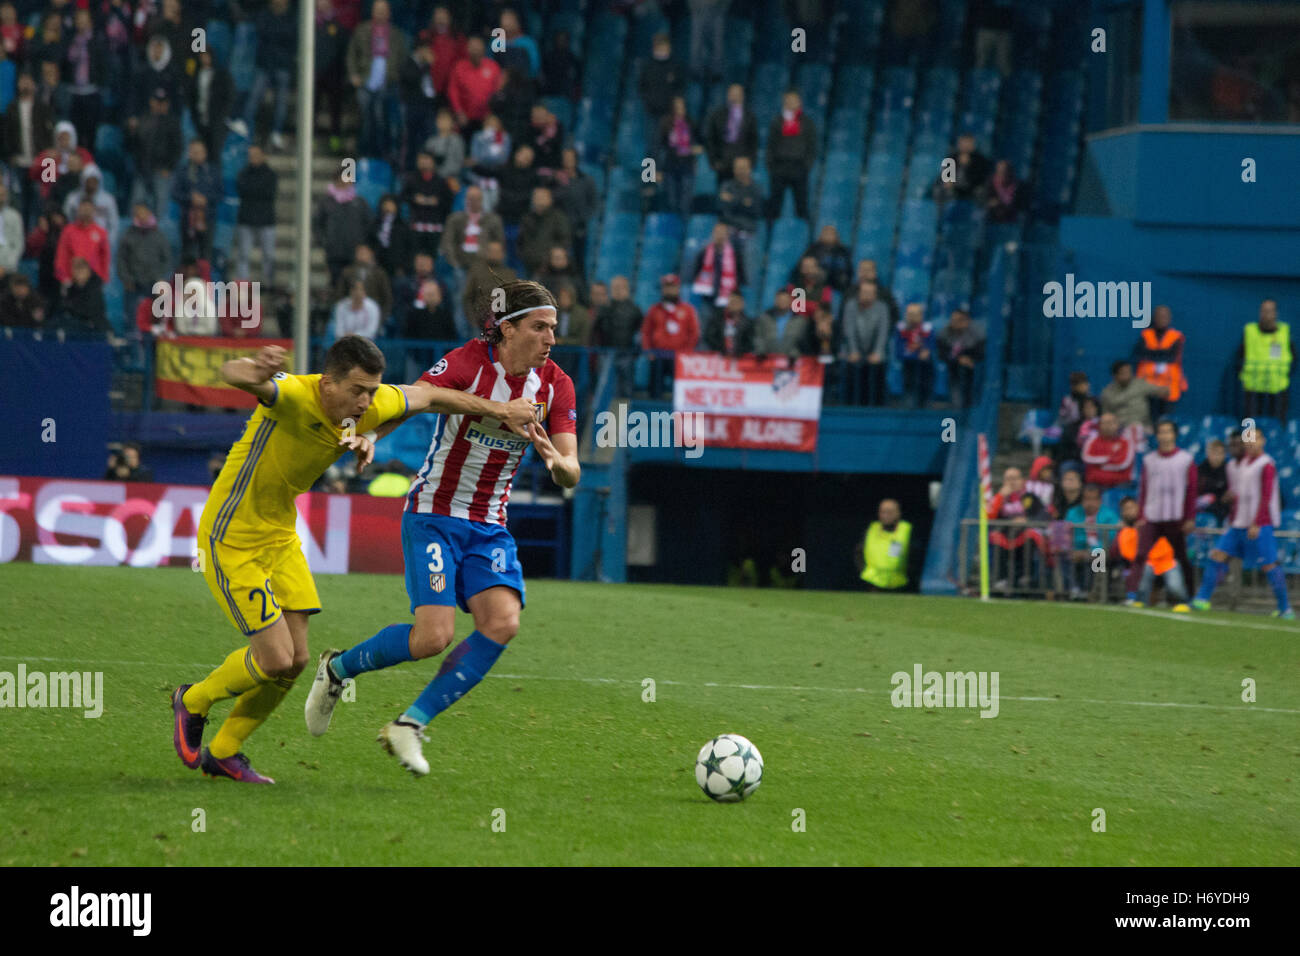 Madrid, Spain. 01st Nov, 2016. Filipe Luis (R) try to evade Prepelita (L). Atletico de Madrid wons by 2 to1 whit two goals of Griezman. © Jorge Gonzalez/Pacific Press/Alamy Live News Stock Photo